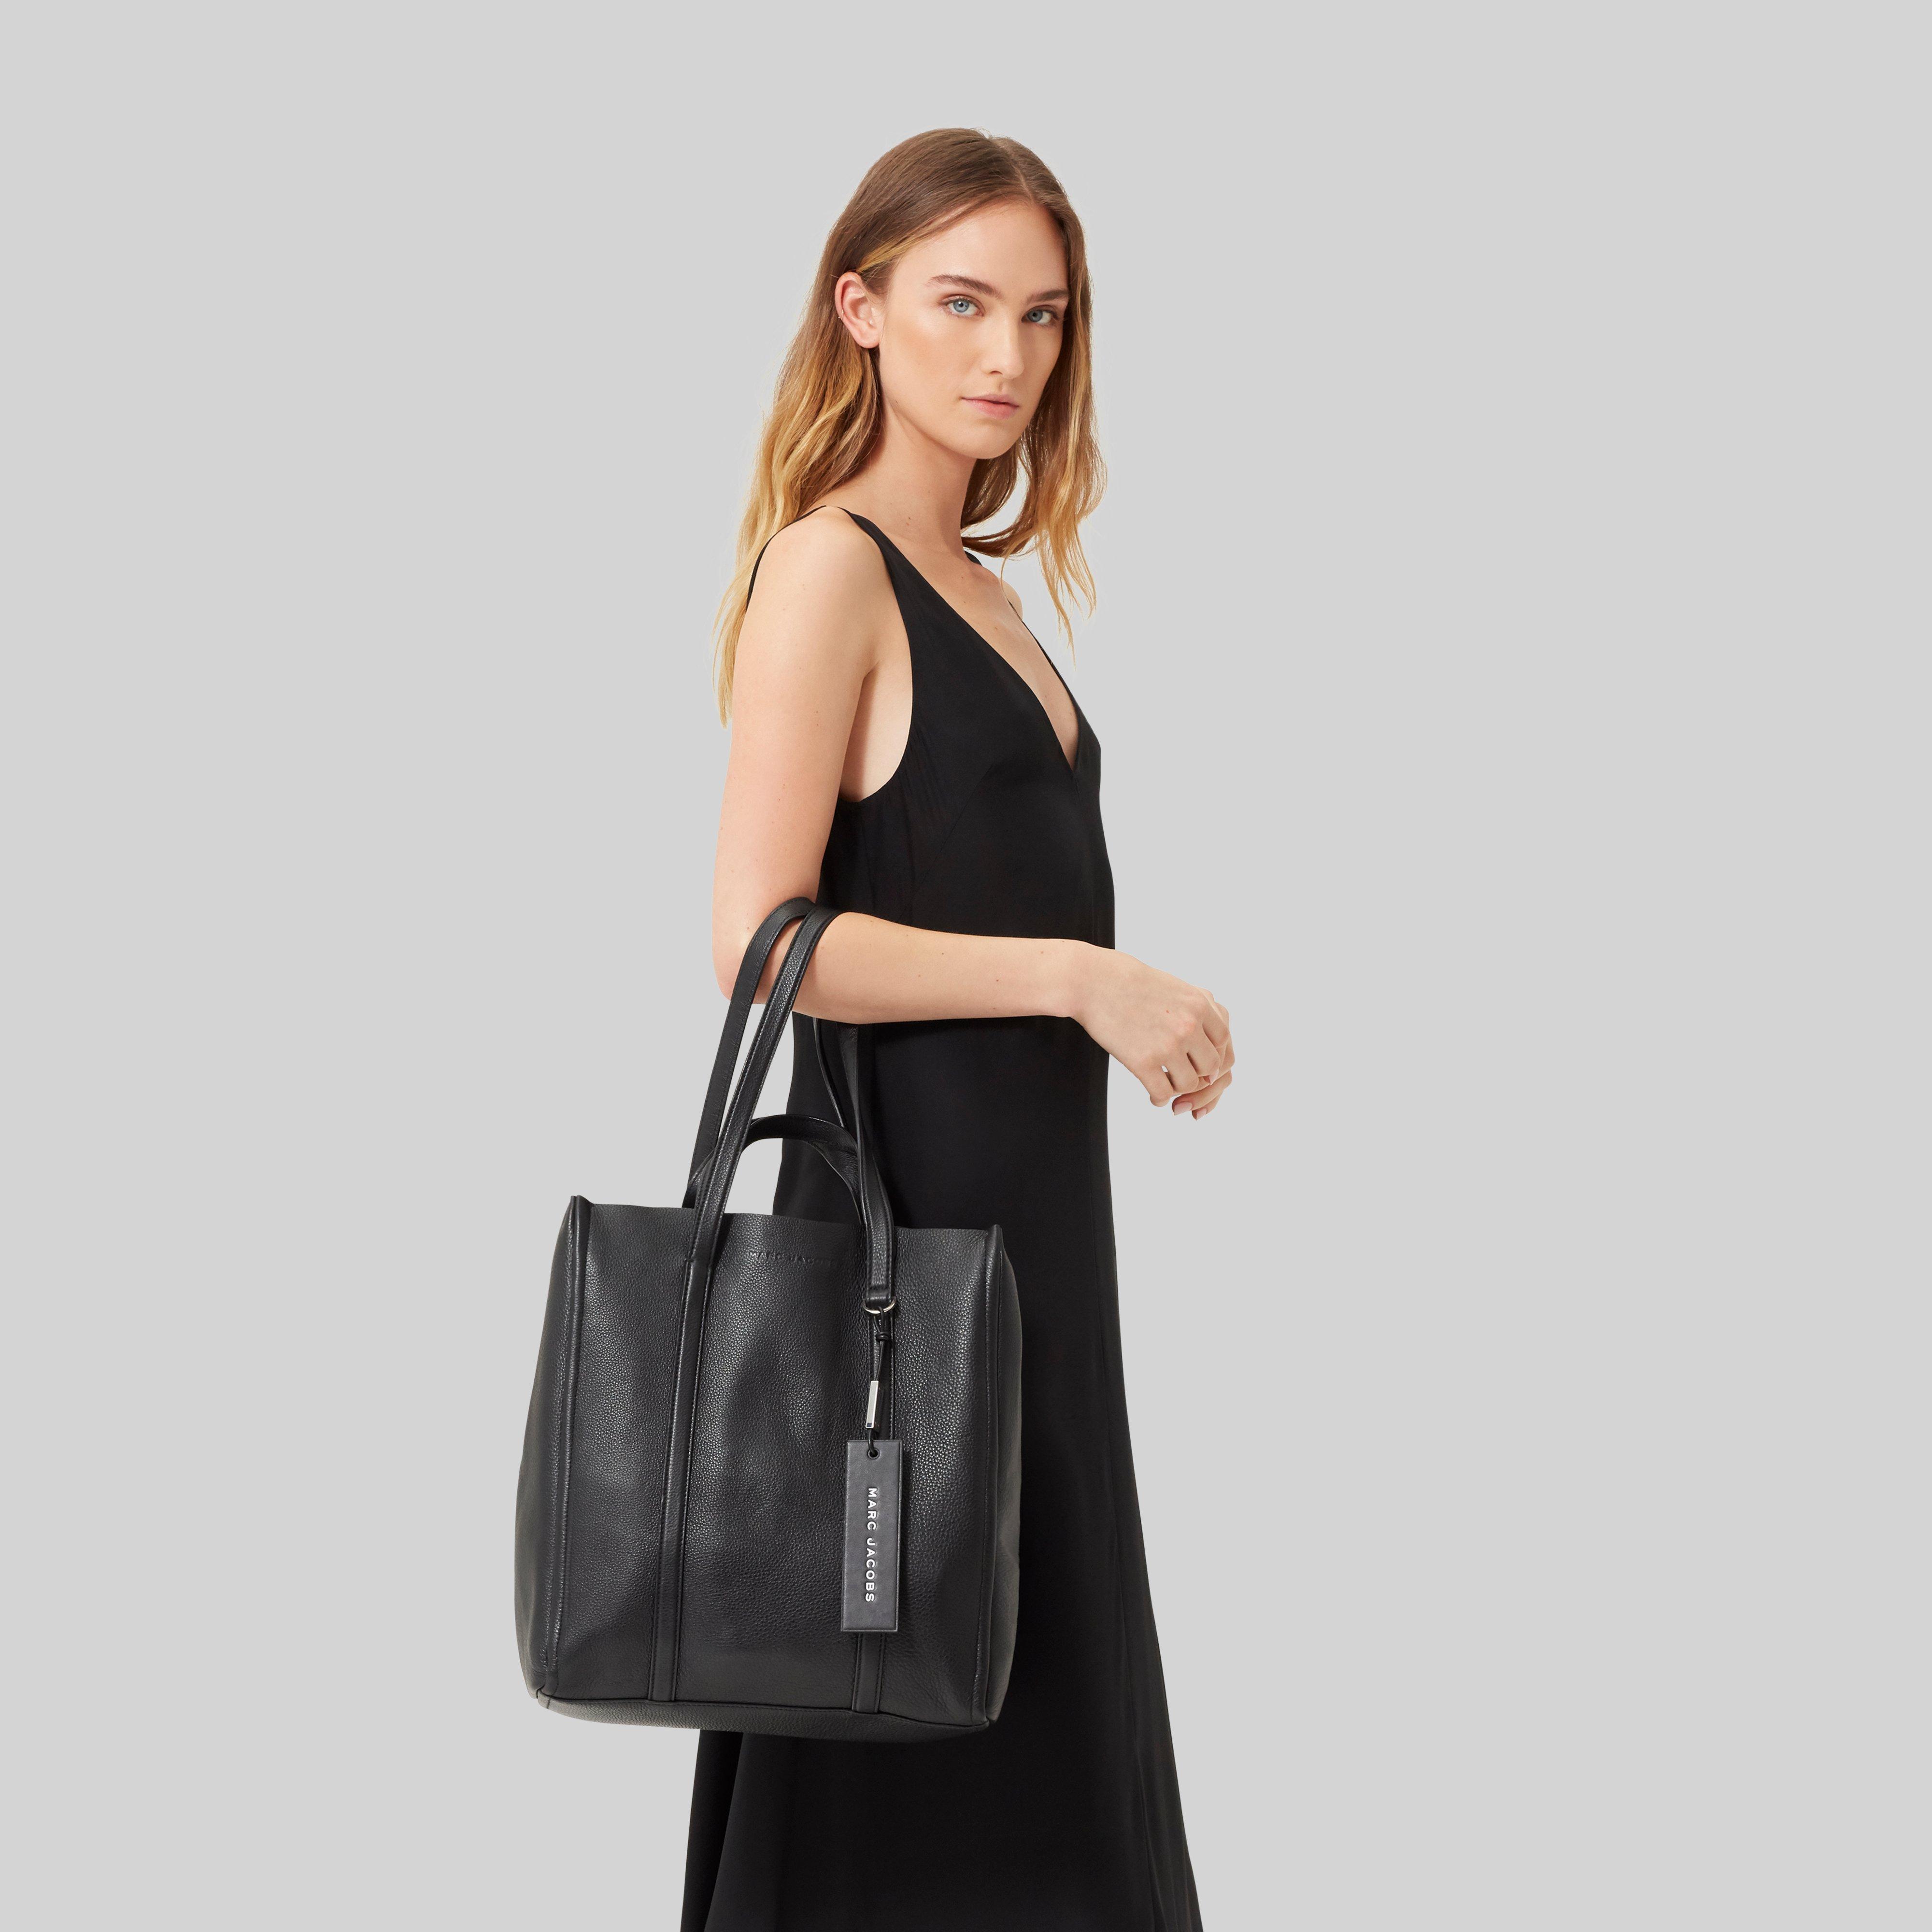 marc jacobs the tote bag review